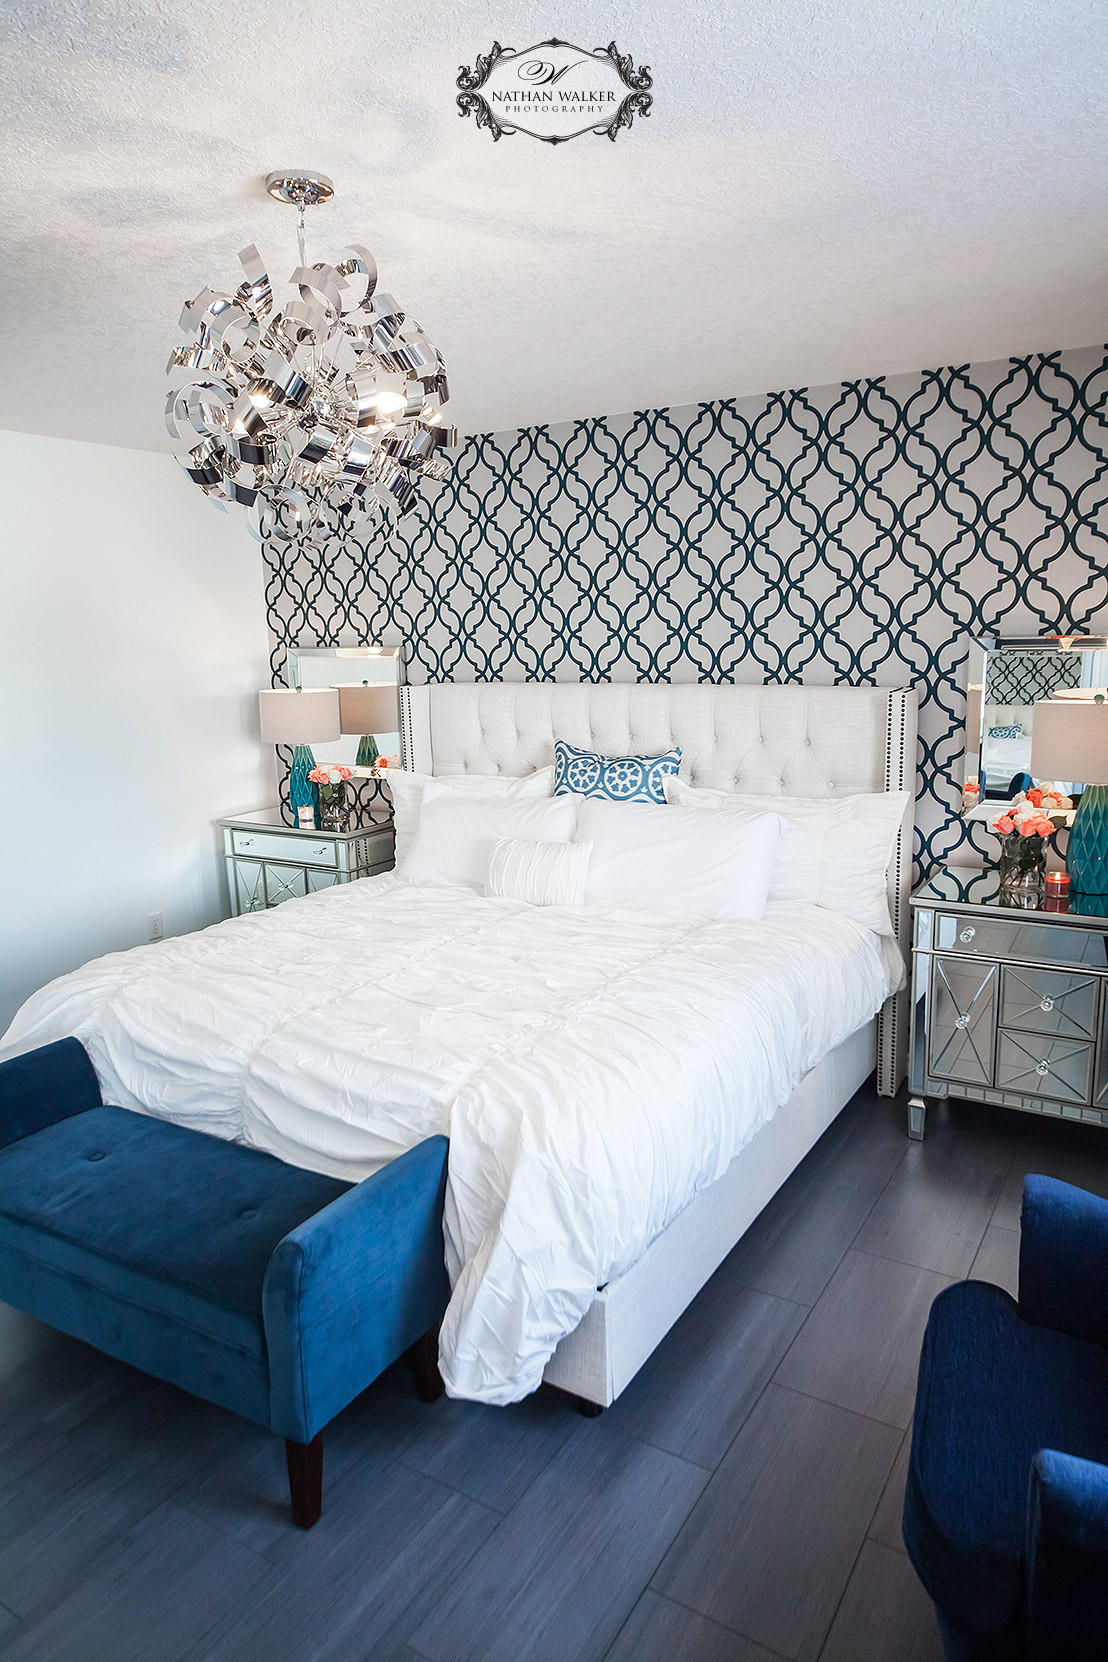 Steal the look of this pricey wallpaper using the Tamara Trellis Stencil. http://www.cuttingedgestencils.com/tamara-trellis-allover-wall-stencils.html